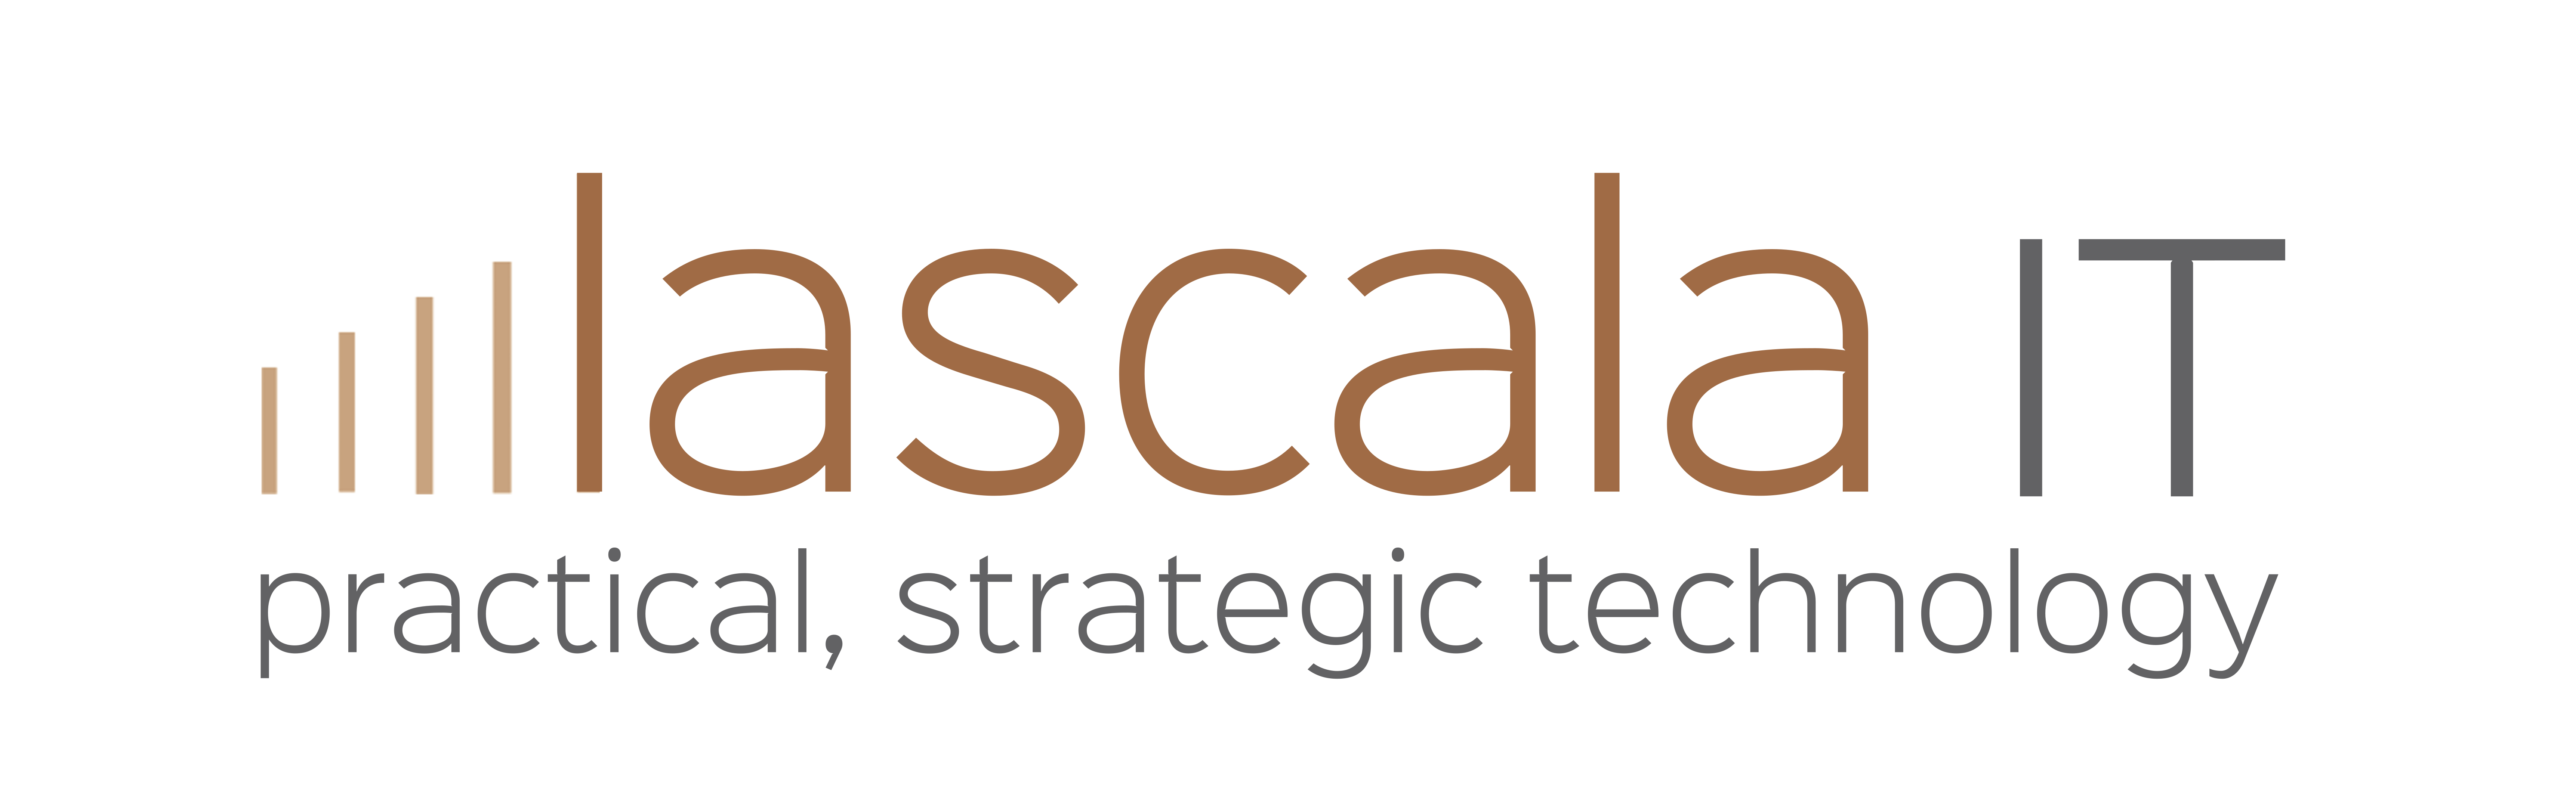 LaScala IT Solutions | Outsourced & Co-Managed IT Services